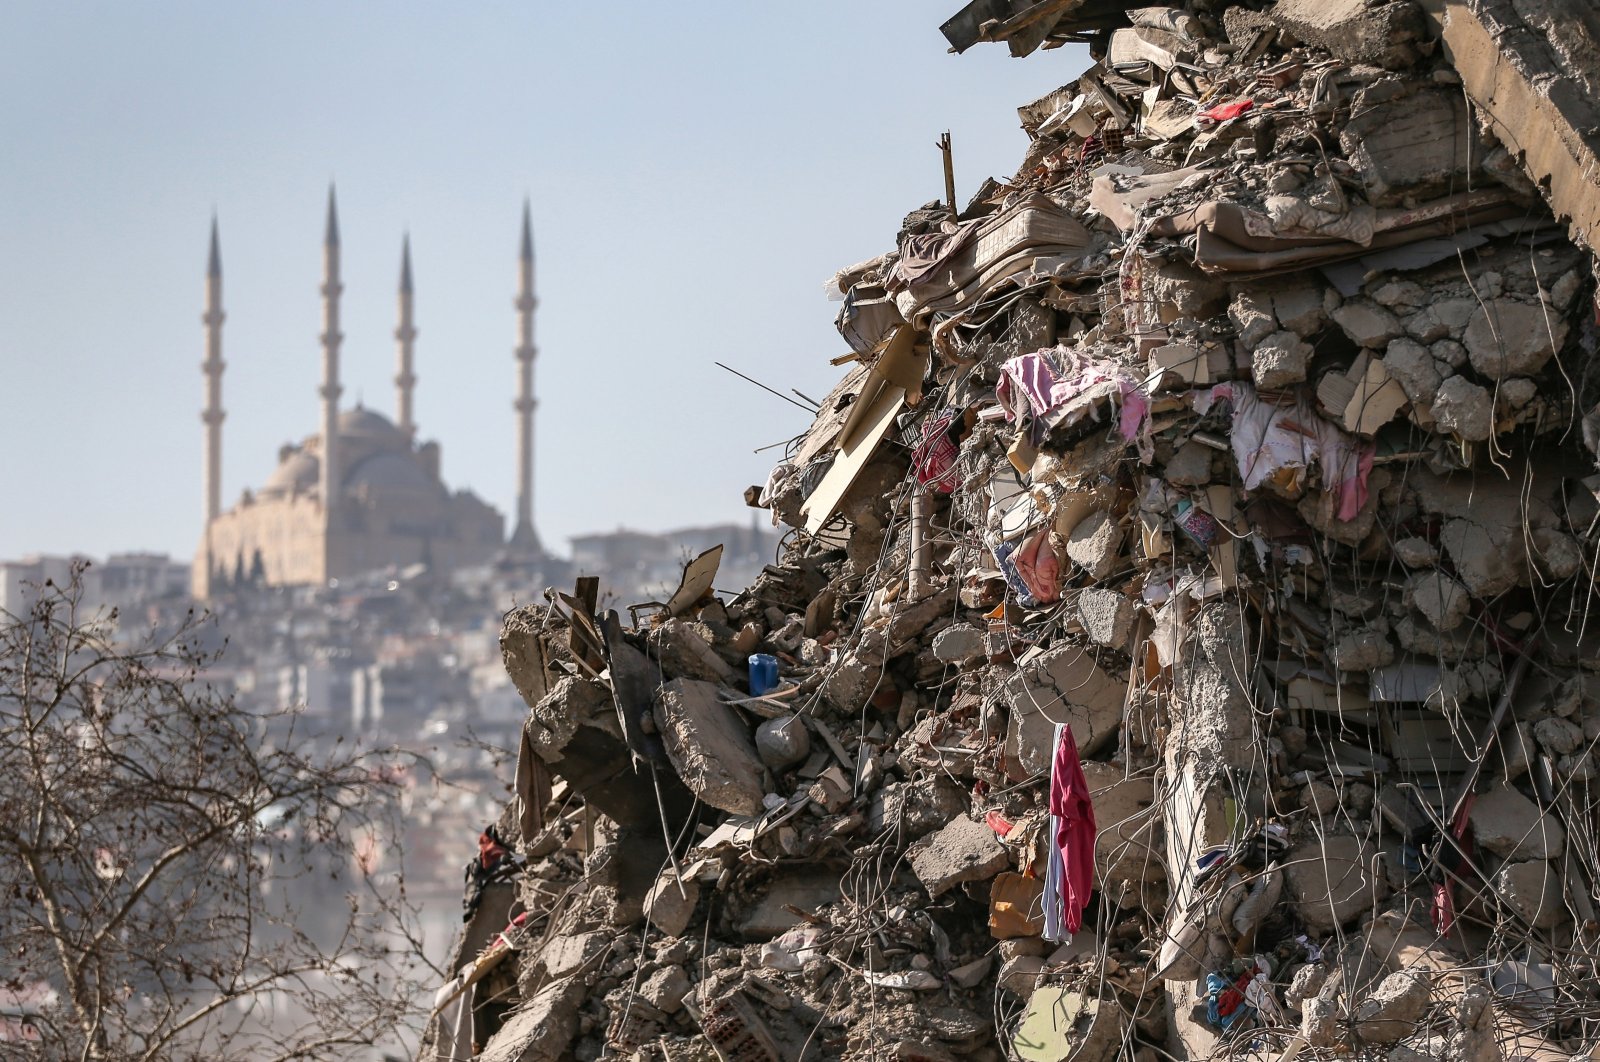 A collapsed building with Abdülhamid Han Mosque in the background after a powerful earthquake in Kahramanmaraş, Türkiye, Feb. 18, 2023. (EPA Photo)